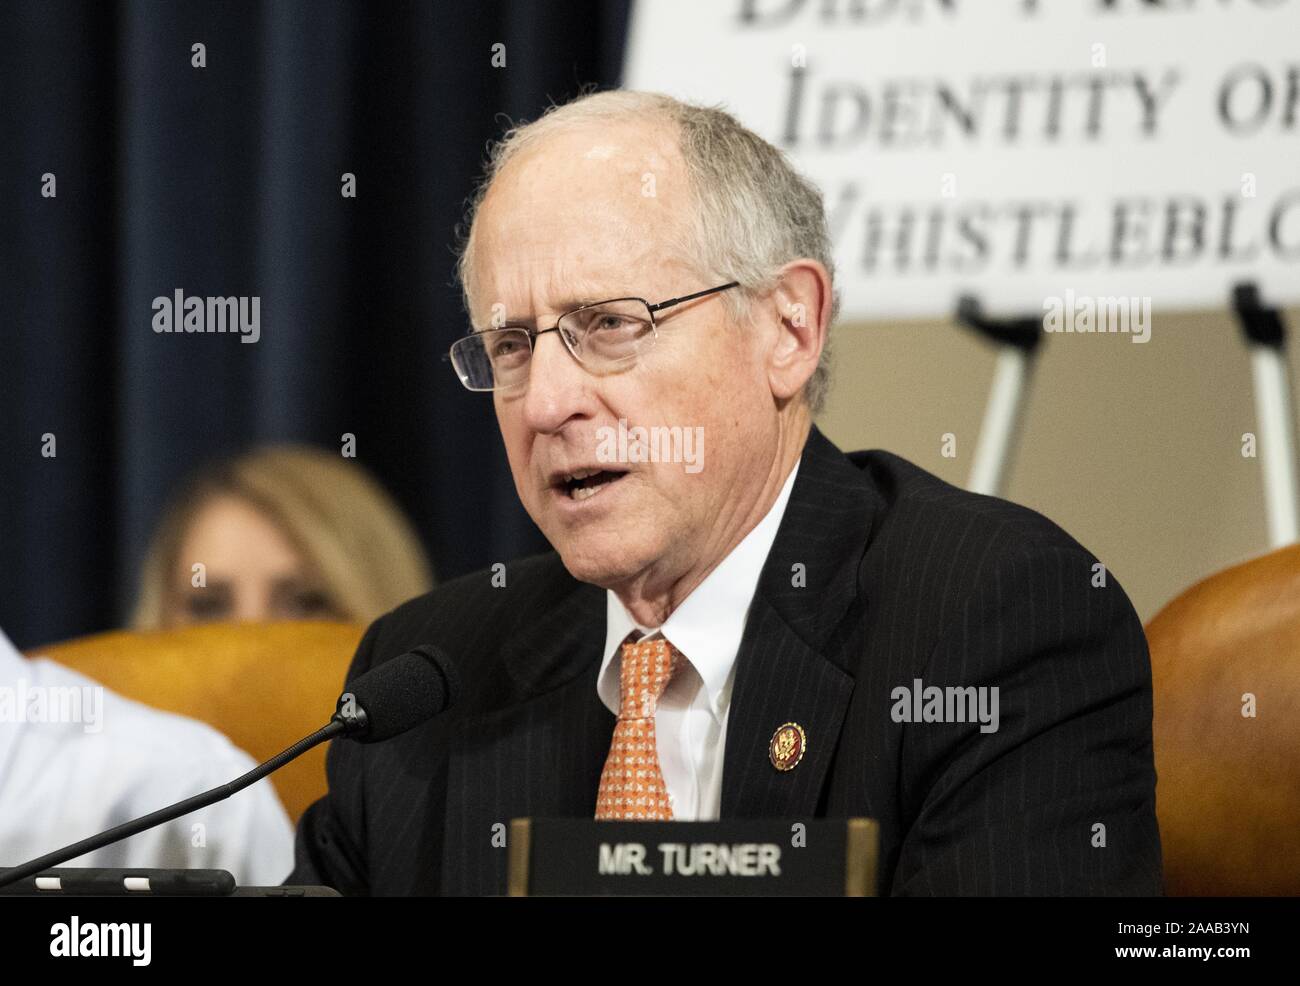 Washington, DC, USA. 20th Nov, 2019. November 20, 2019 - Washington, DC, United States: U.S. Representative MIKE CONAWAY (R-TX) at the Open Hearings on the Impeachment of President Donald Trump of the House Intelligence Committee. Credit: Michael Brochstein/ZUMA Wire/Alamy Live News Stock Photo